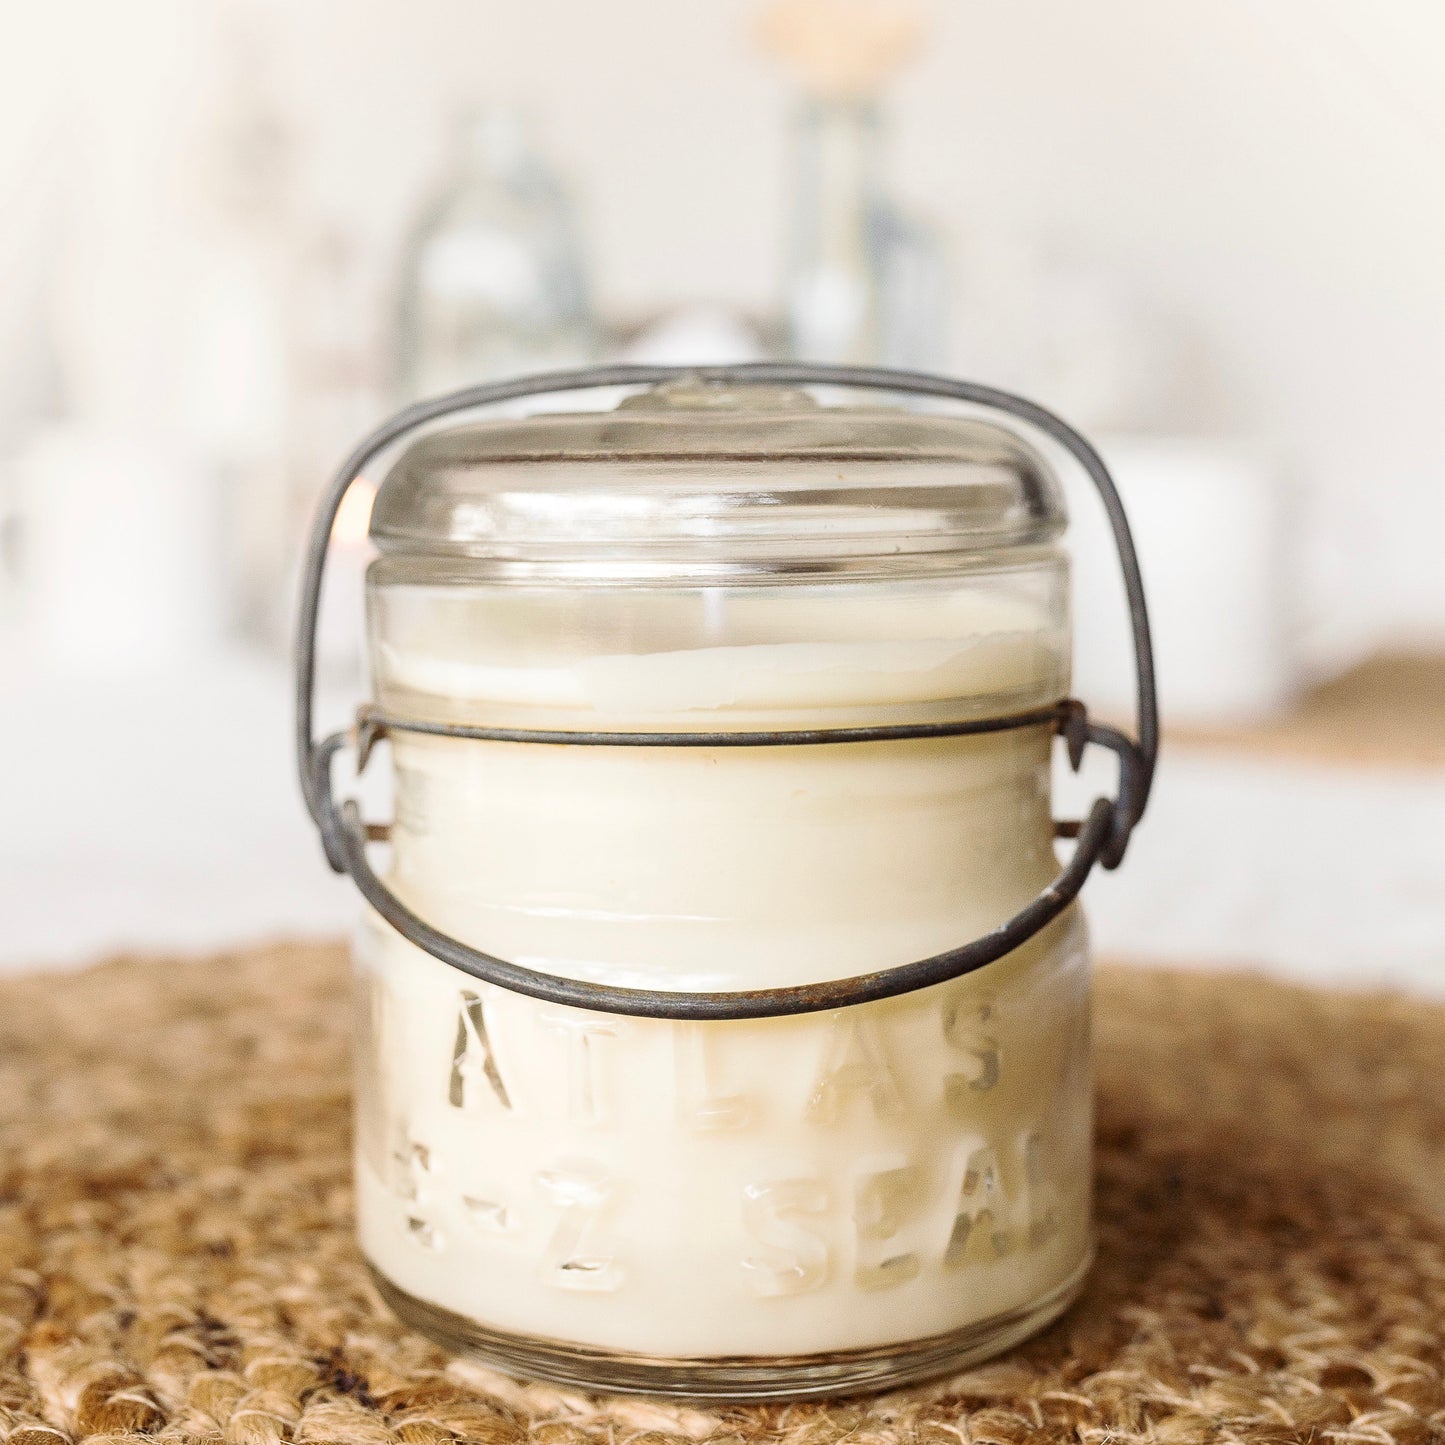 Scented Candle in Vintage Clear Half-Pint Atlas Mason Jar